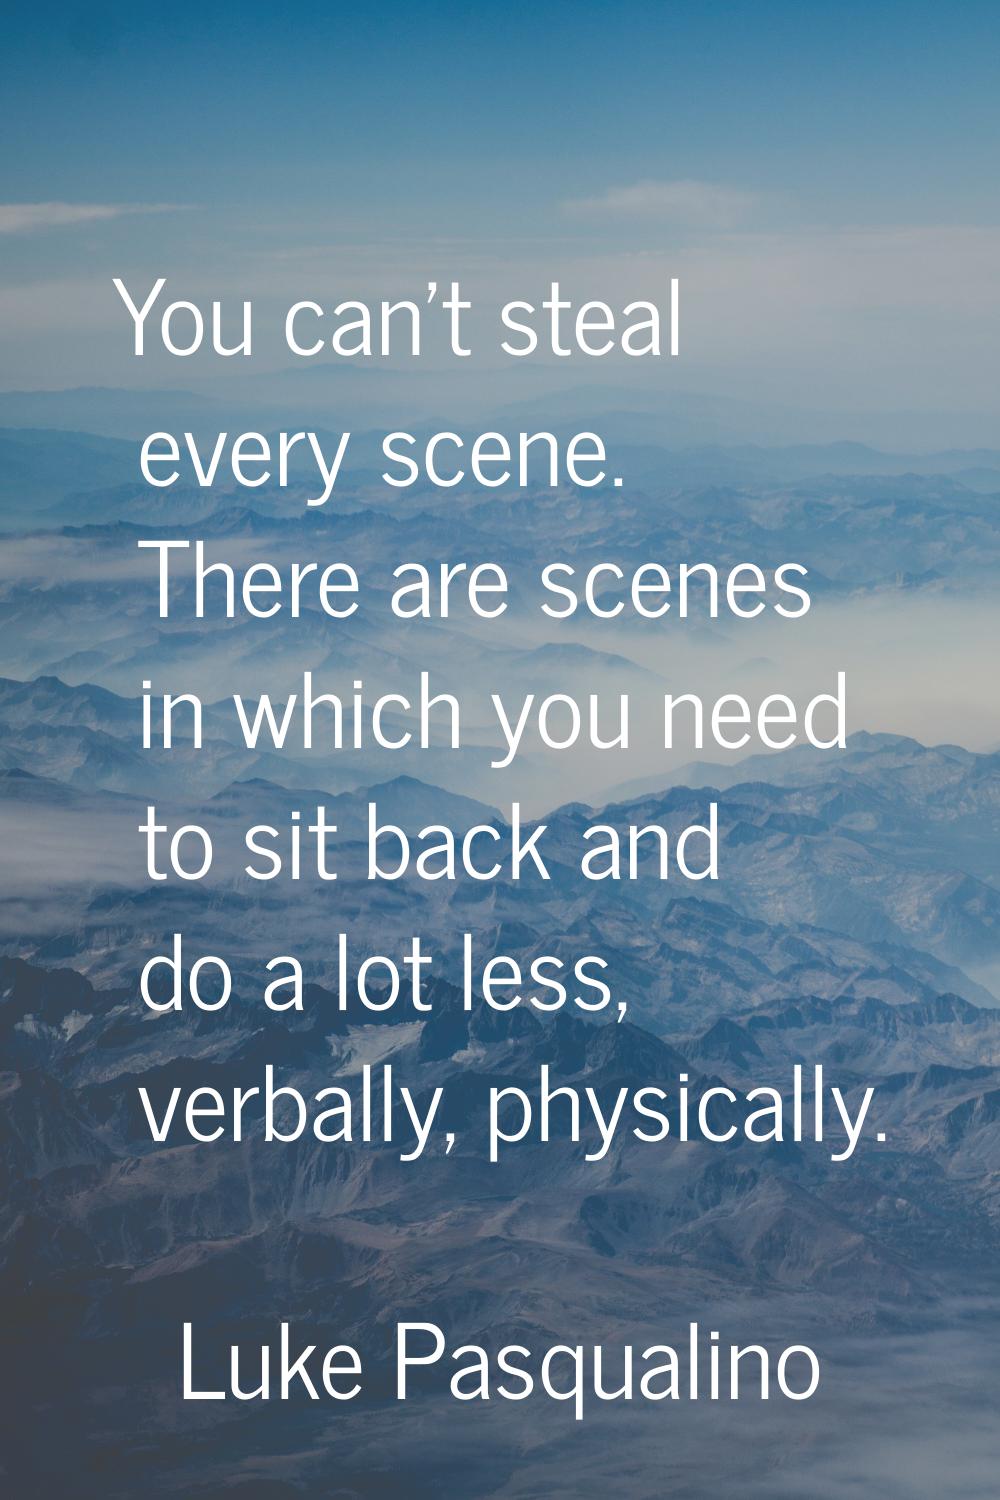 You can't steal every scene. There are scenes in which you need to sit back and do a lot less, verb